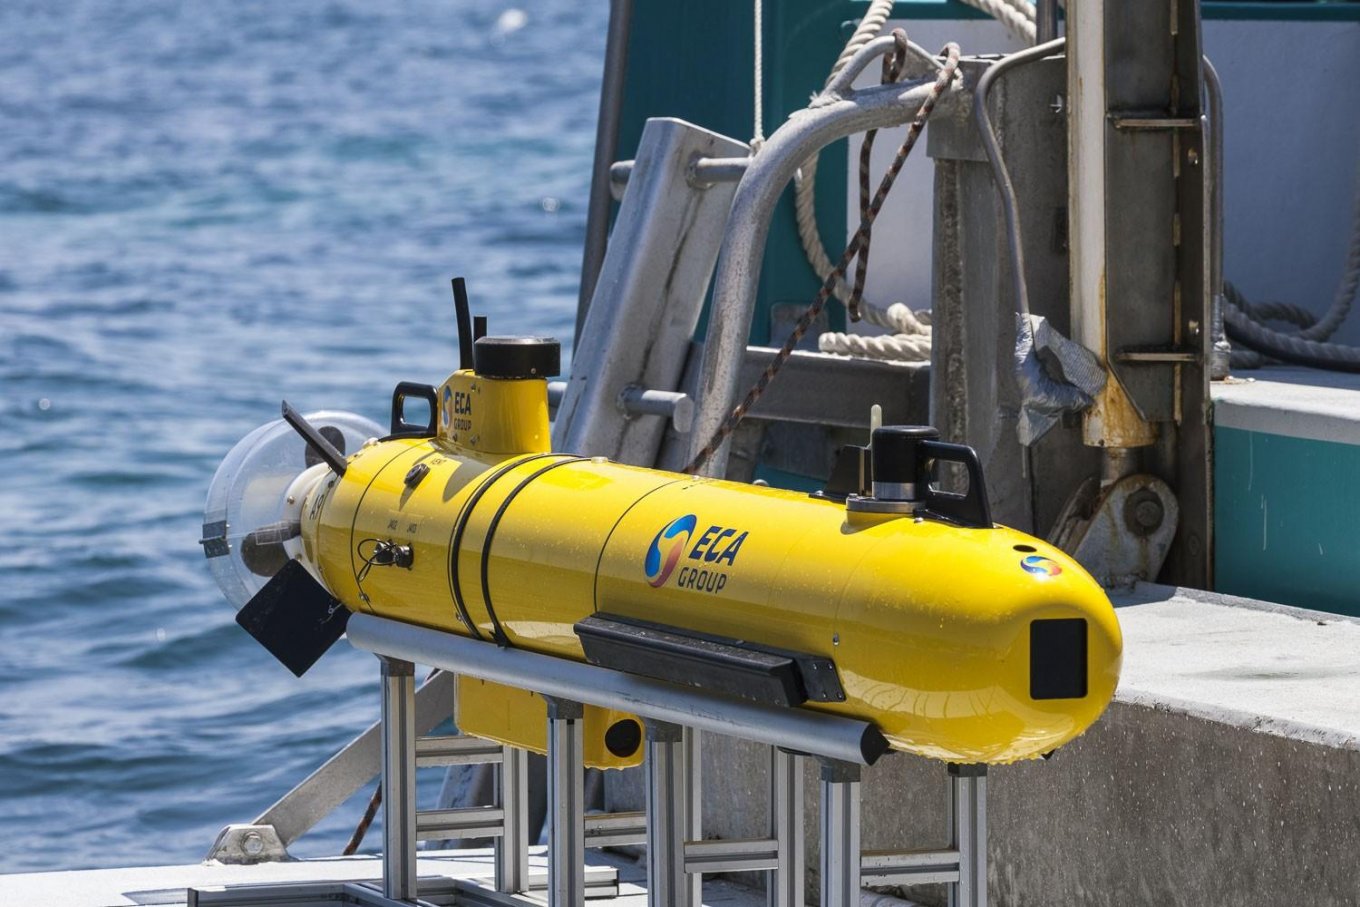 French Alister 9 autonomous underwater vehicle, which is used, in particular, on russia’s Alexandrit-class minesweepers, Could russia Get Kamikaze Boats From Iran or What UUV Does It Even Have, Defense Express